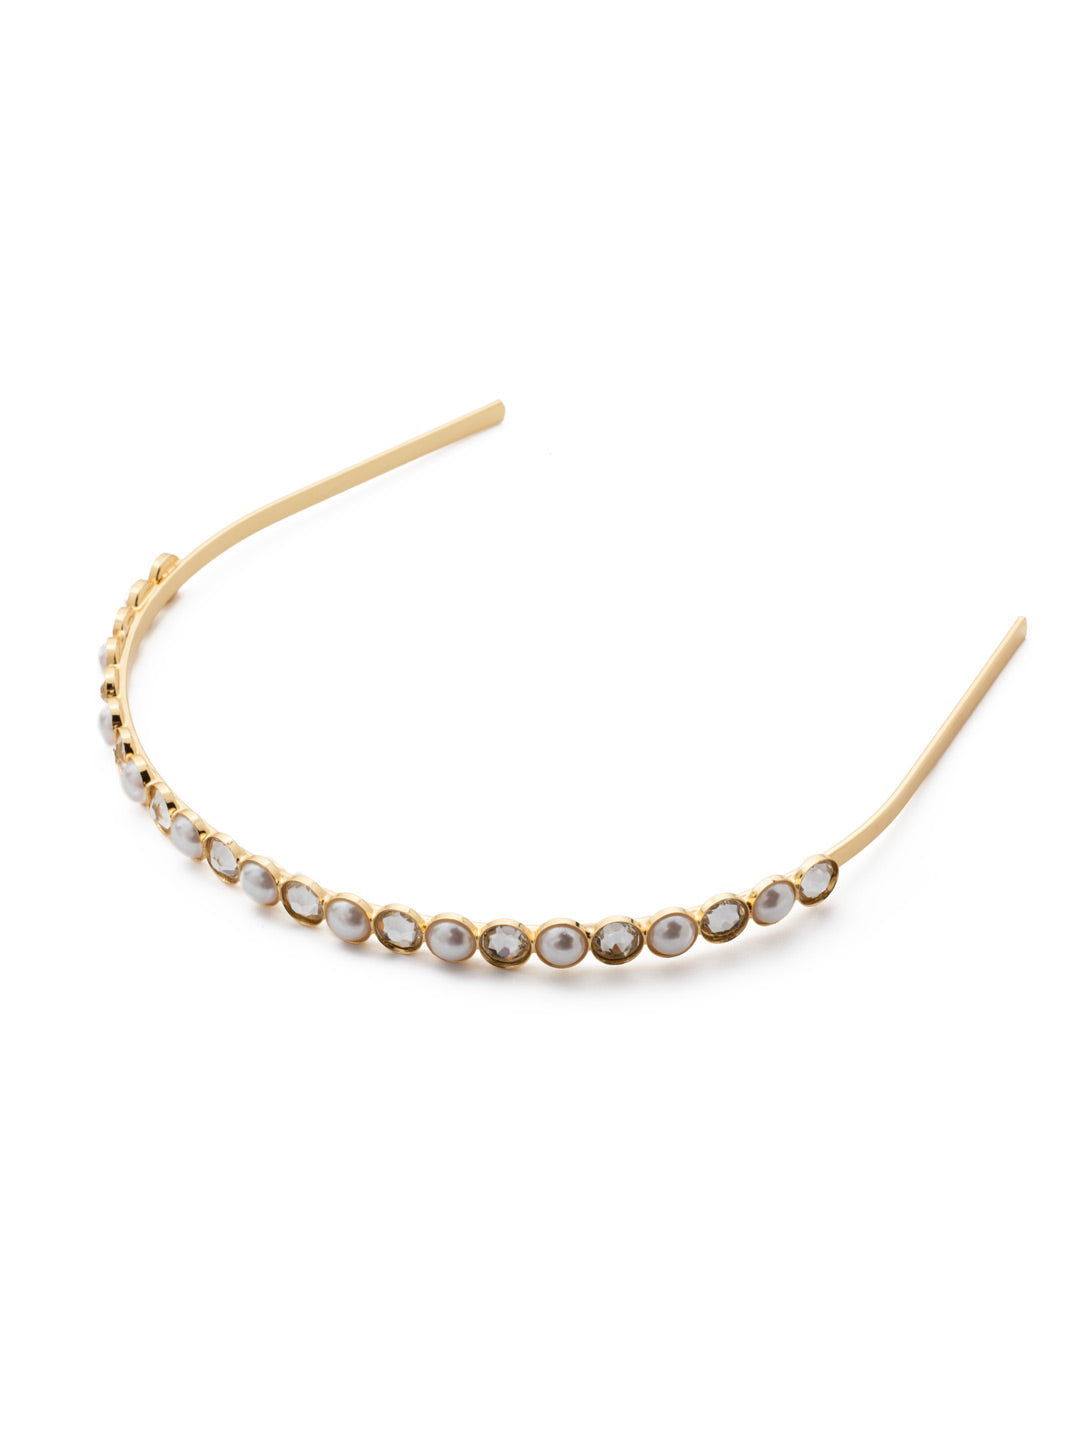 Alondra Headband - HET1BGMDP - <p>A headband with cystals, what more could you ask for? The Alondra headband is perfect for any special occasion. From Sorrelli's Modern Pearl collection in our Bright Gold-tone finish.</p>